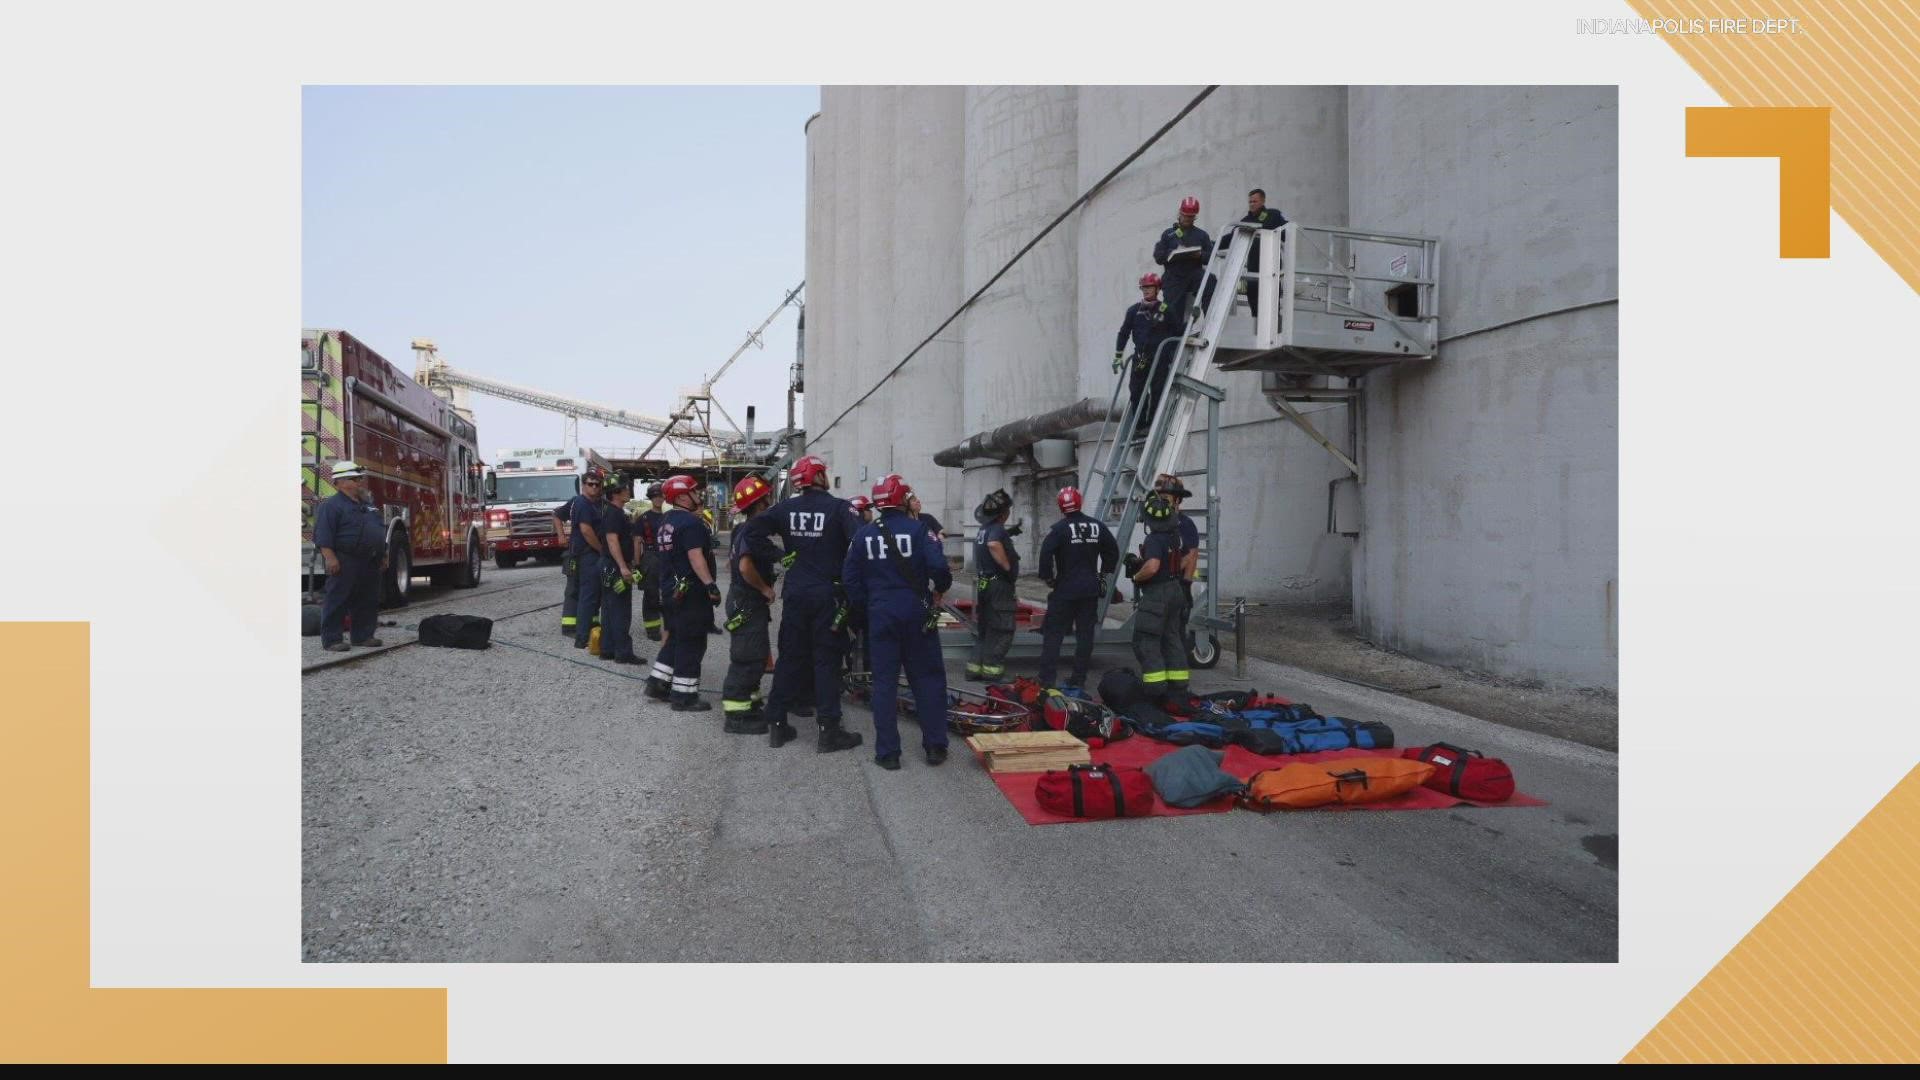 Crews worked for more than ten hours to recover a man's body from a grain silo in Indianapolis.